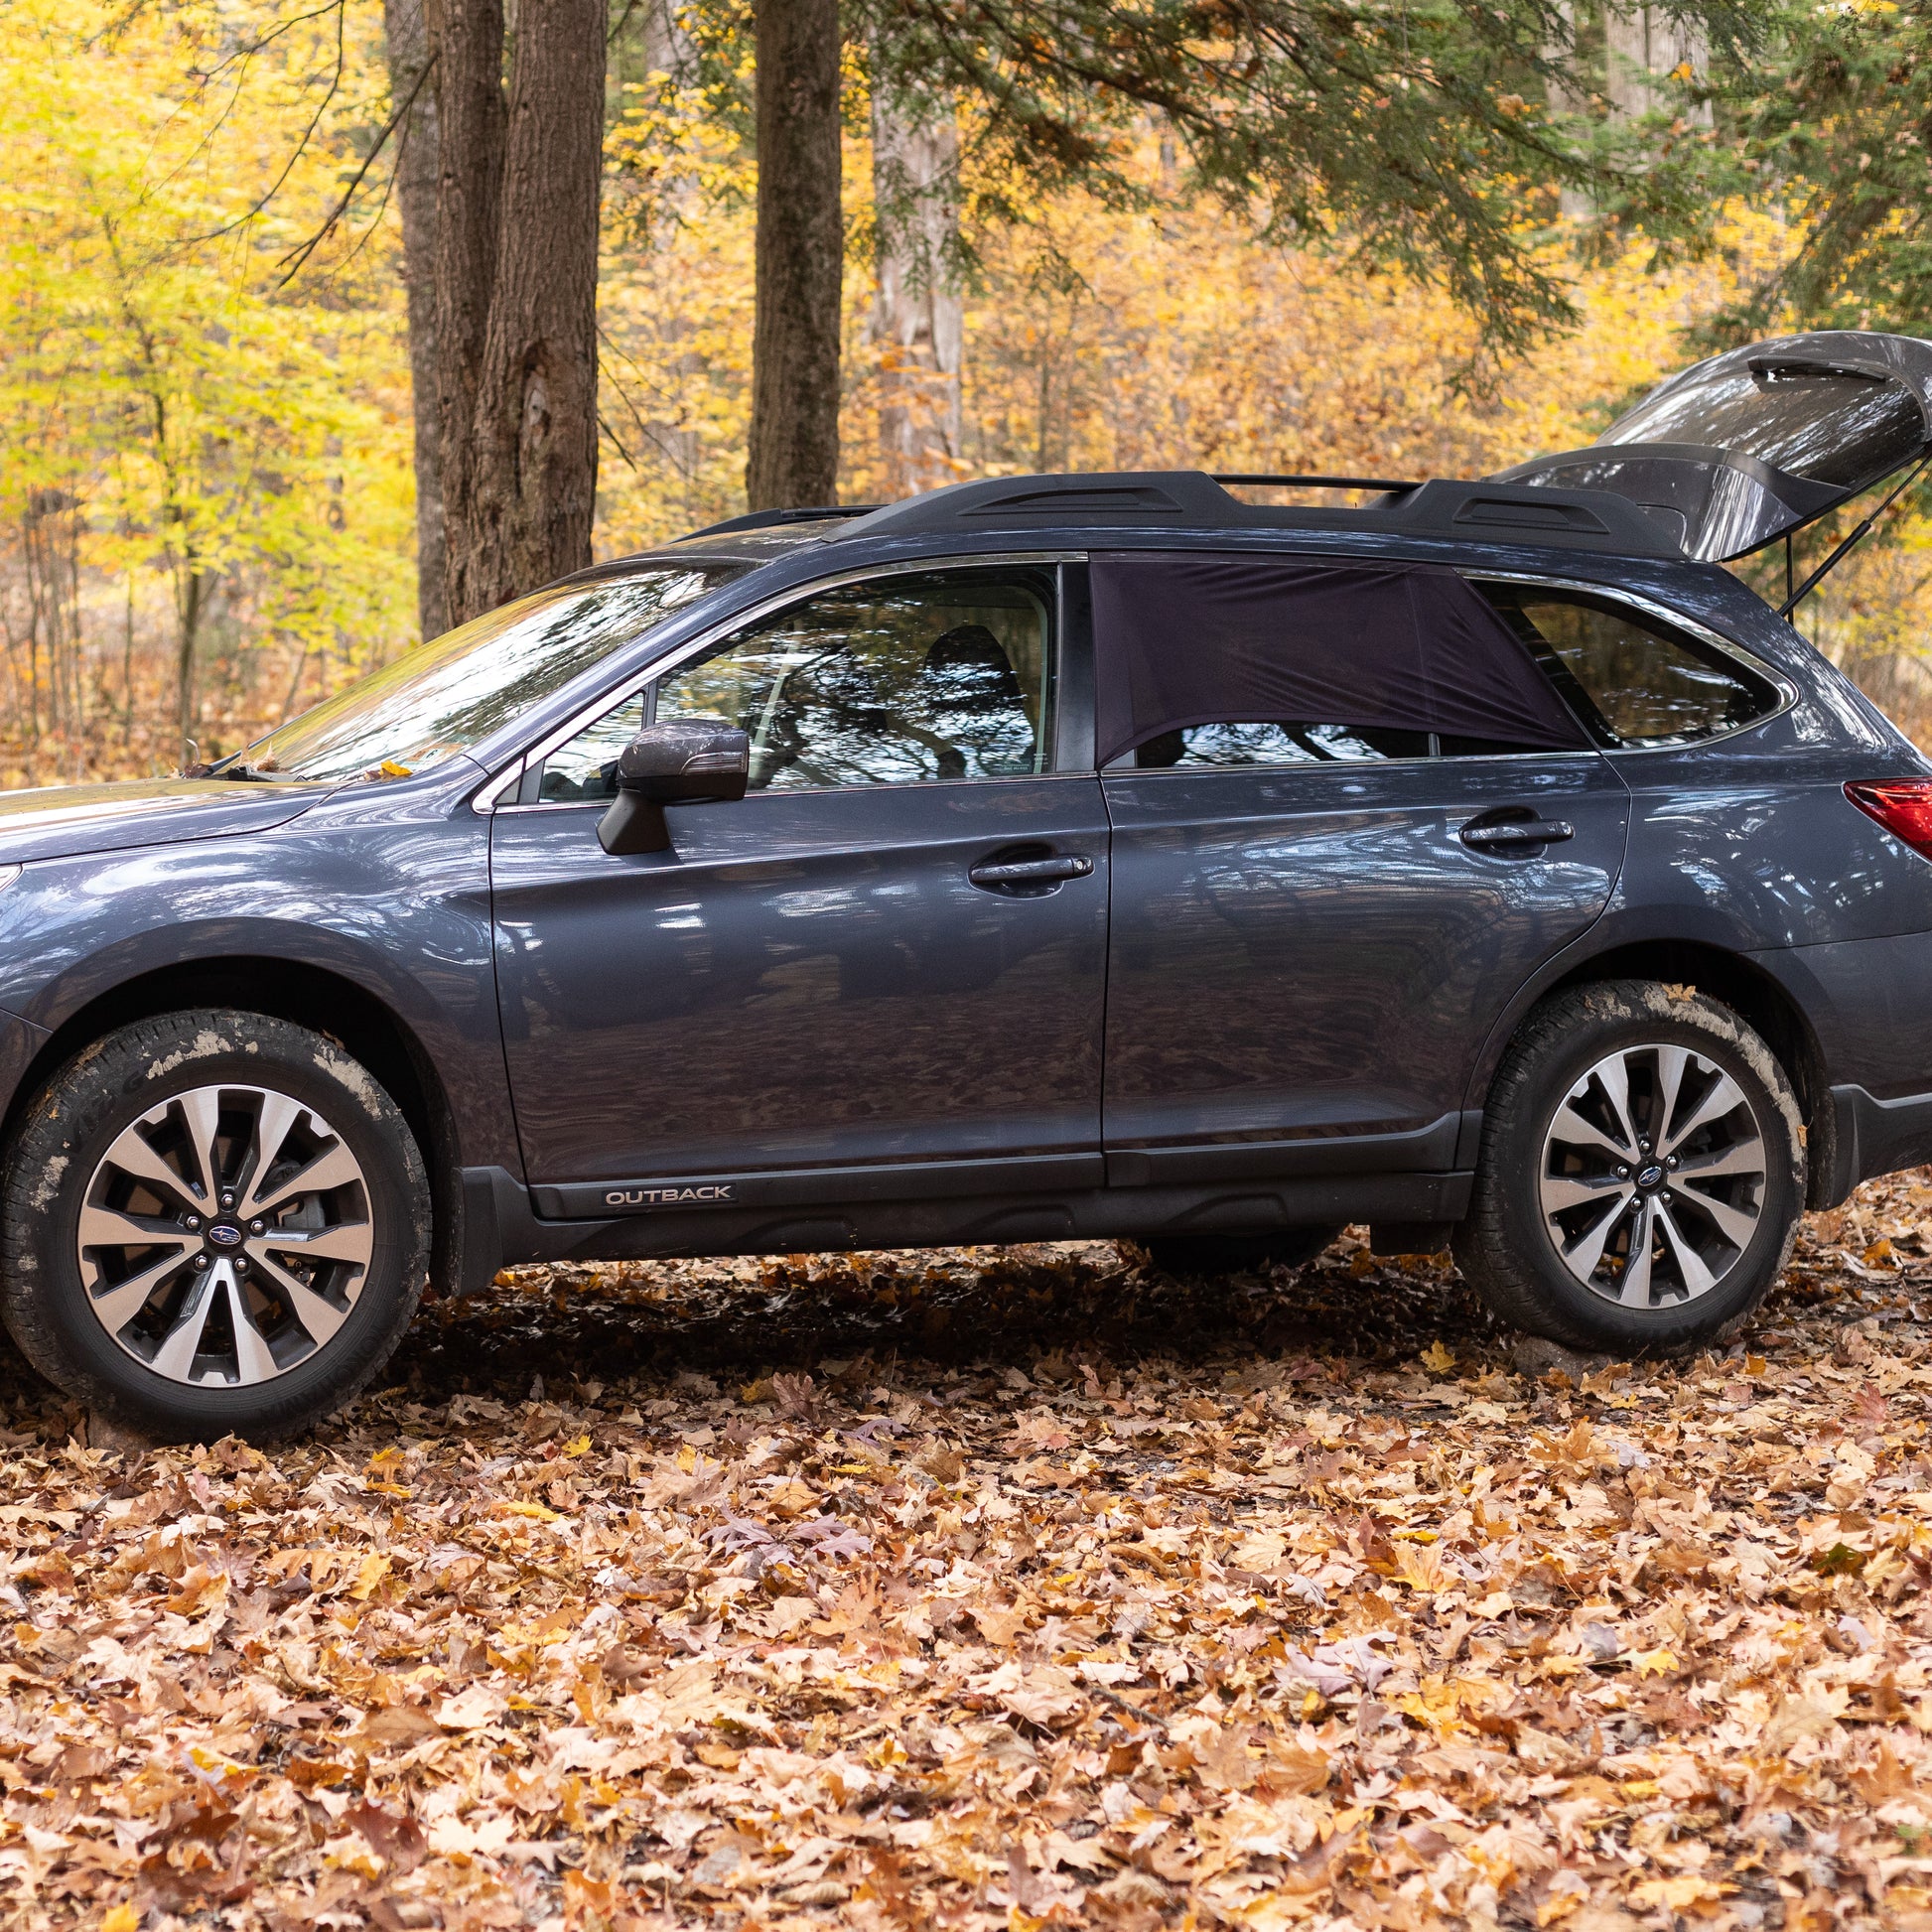 The 2018 Subaru Outback with CarToCamp Mesh Window Screens is parked in the woods.